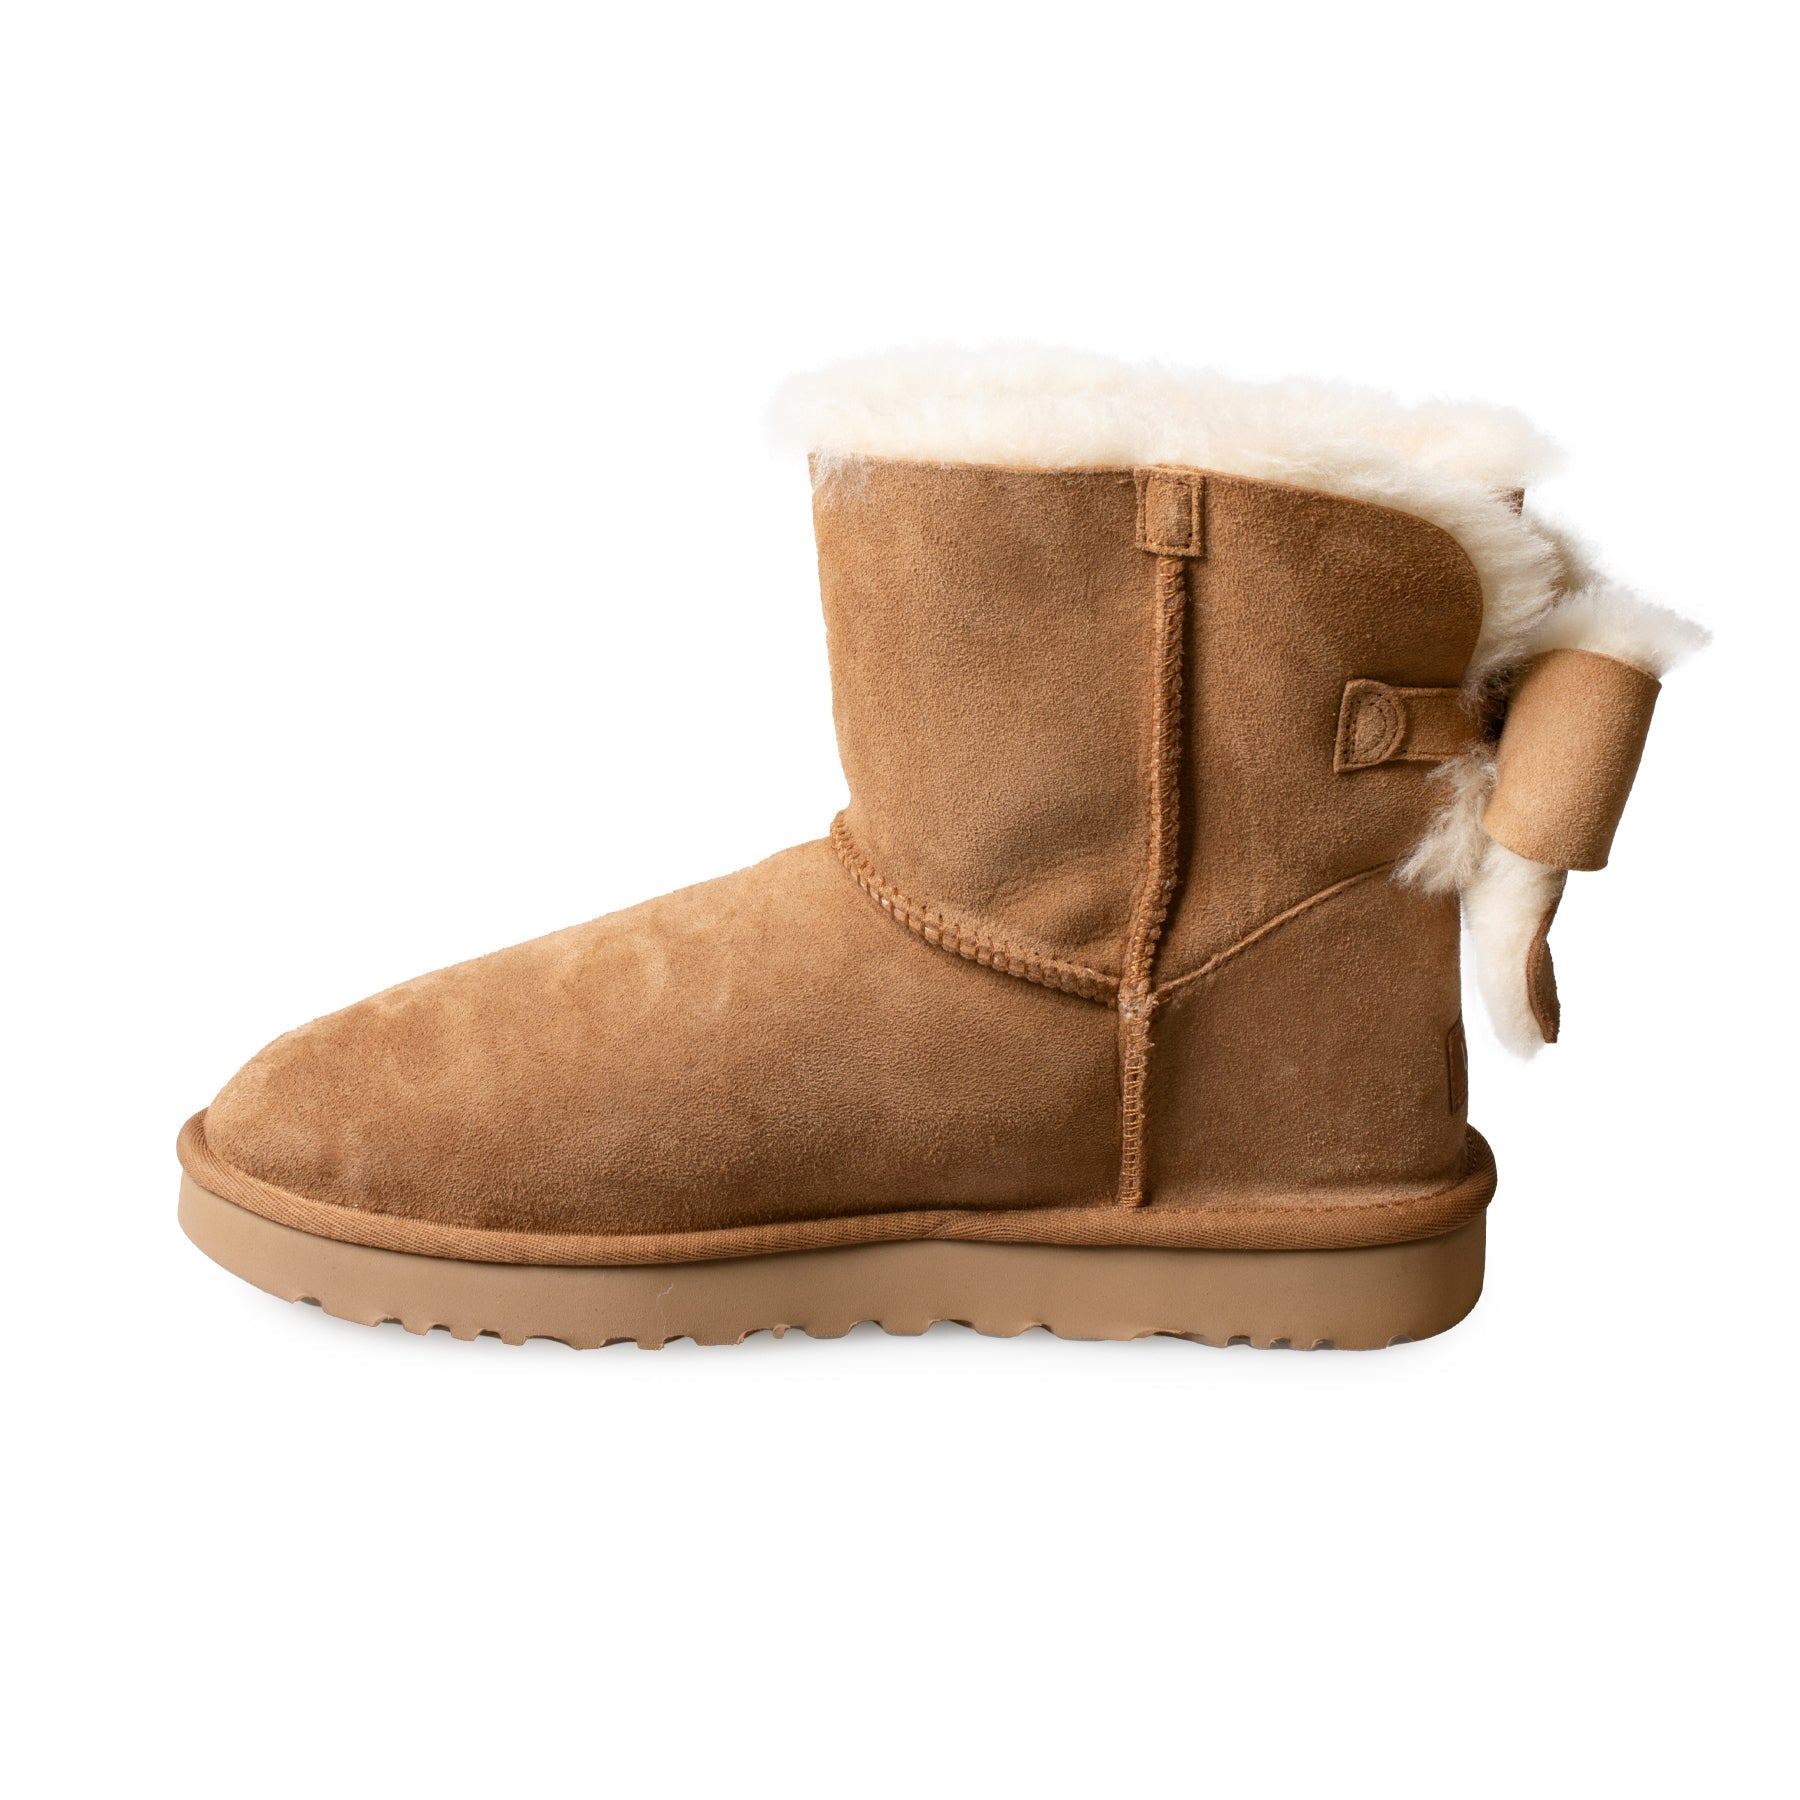 UGG Classic Heritage Bow Chestnut Boots - Women's